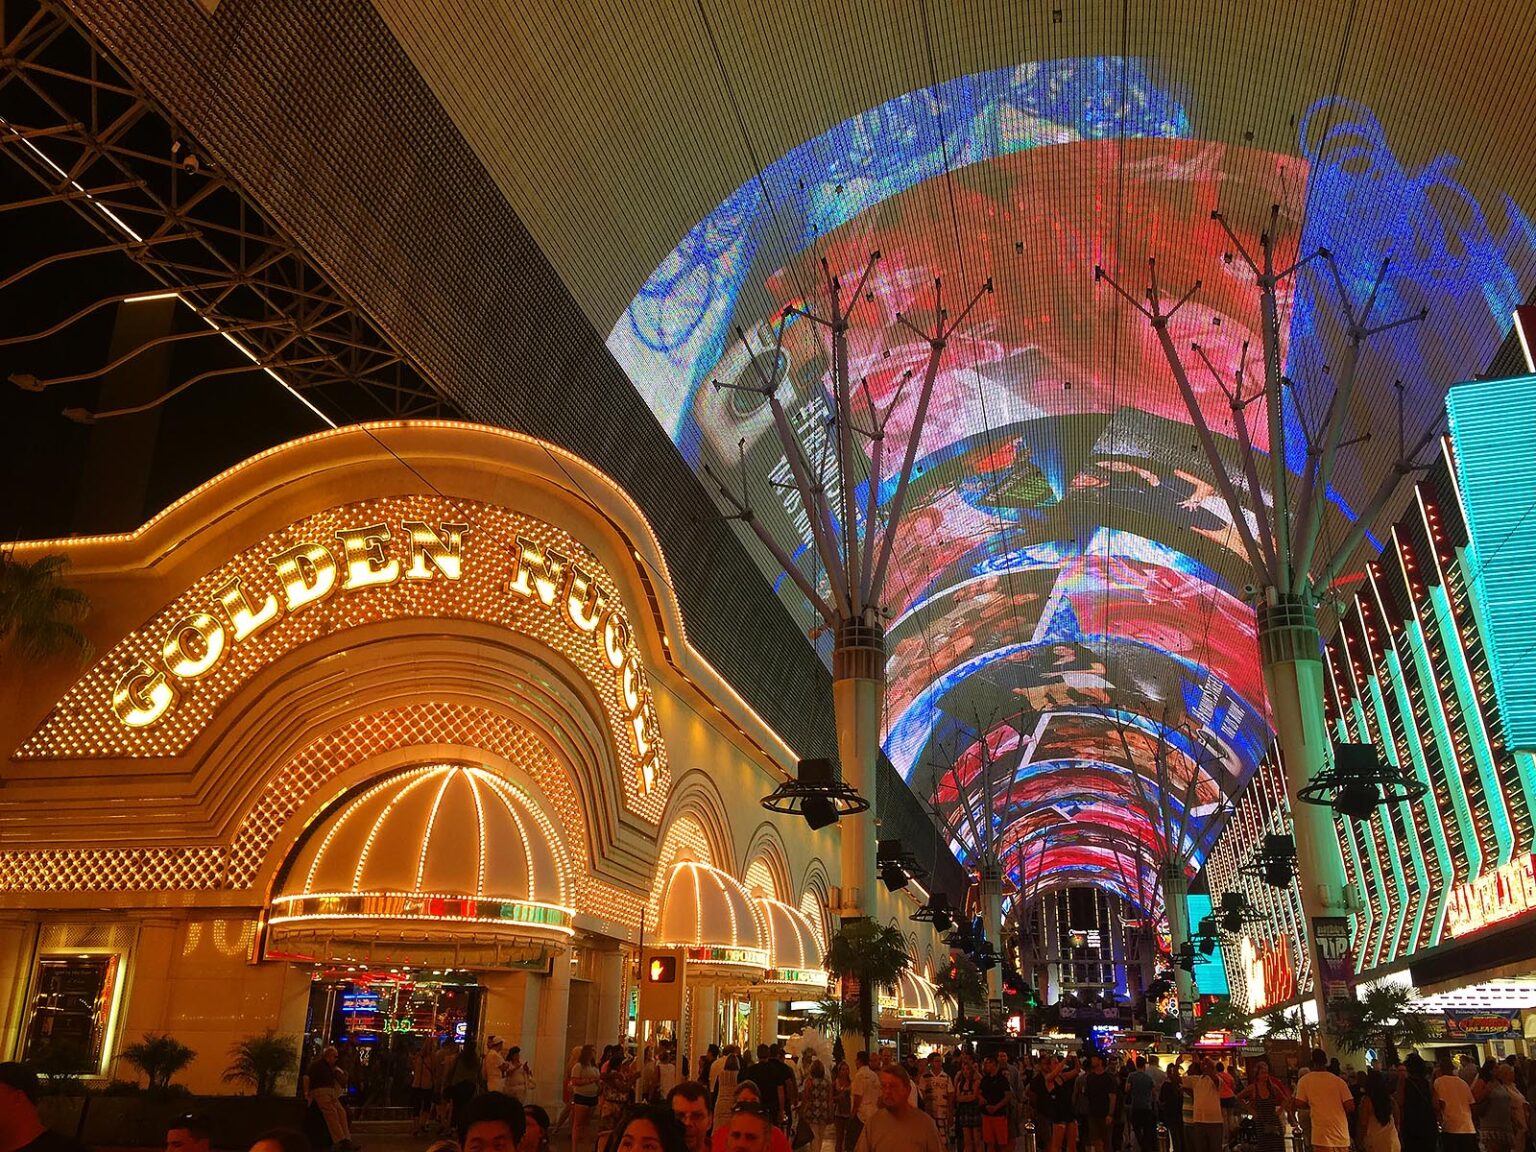 The light show at the FREMONT STREET EXPERIENCE - LAS VEGAS, NEVADA